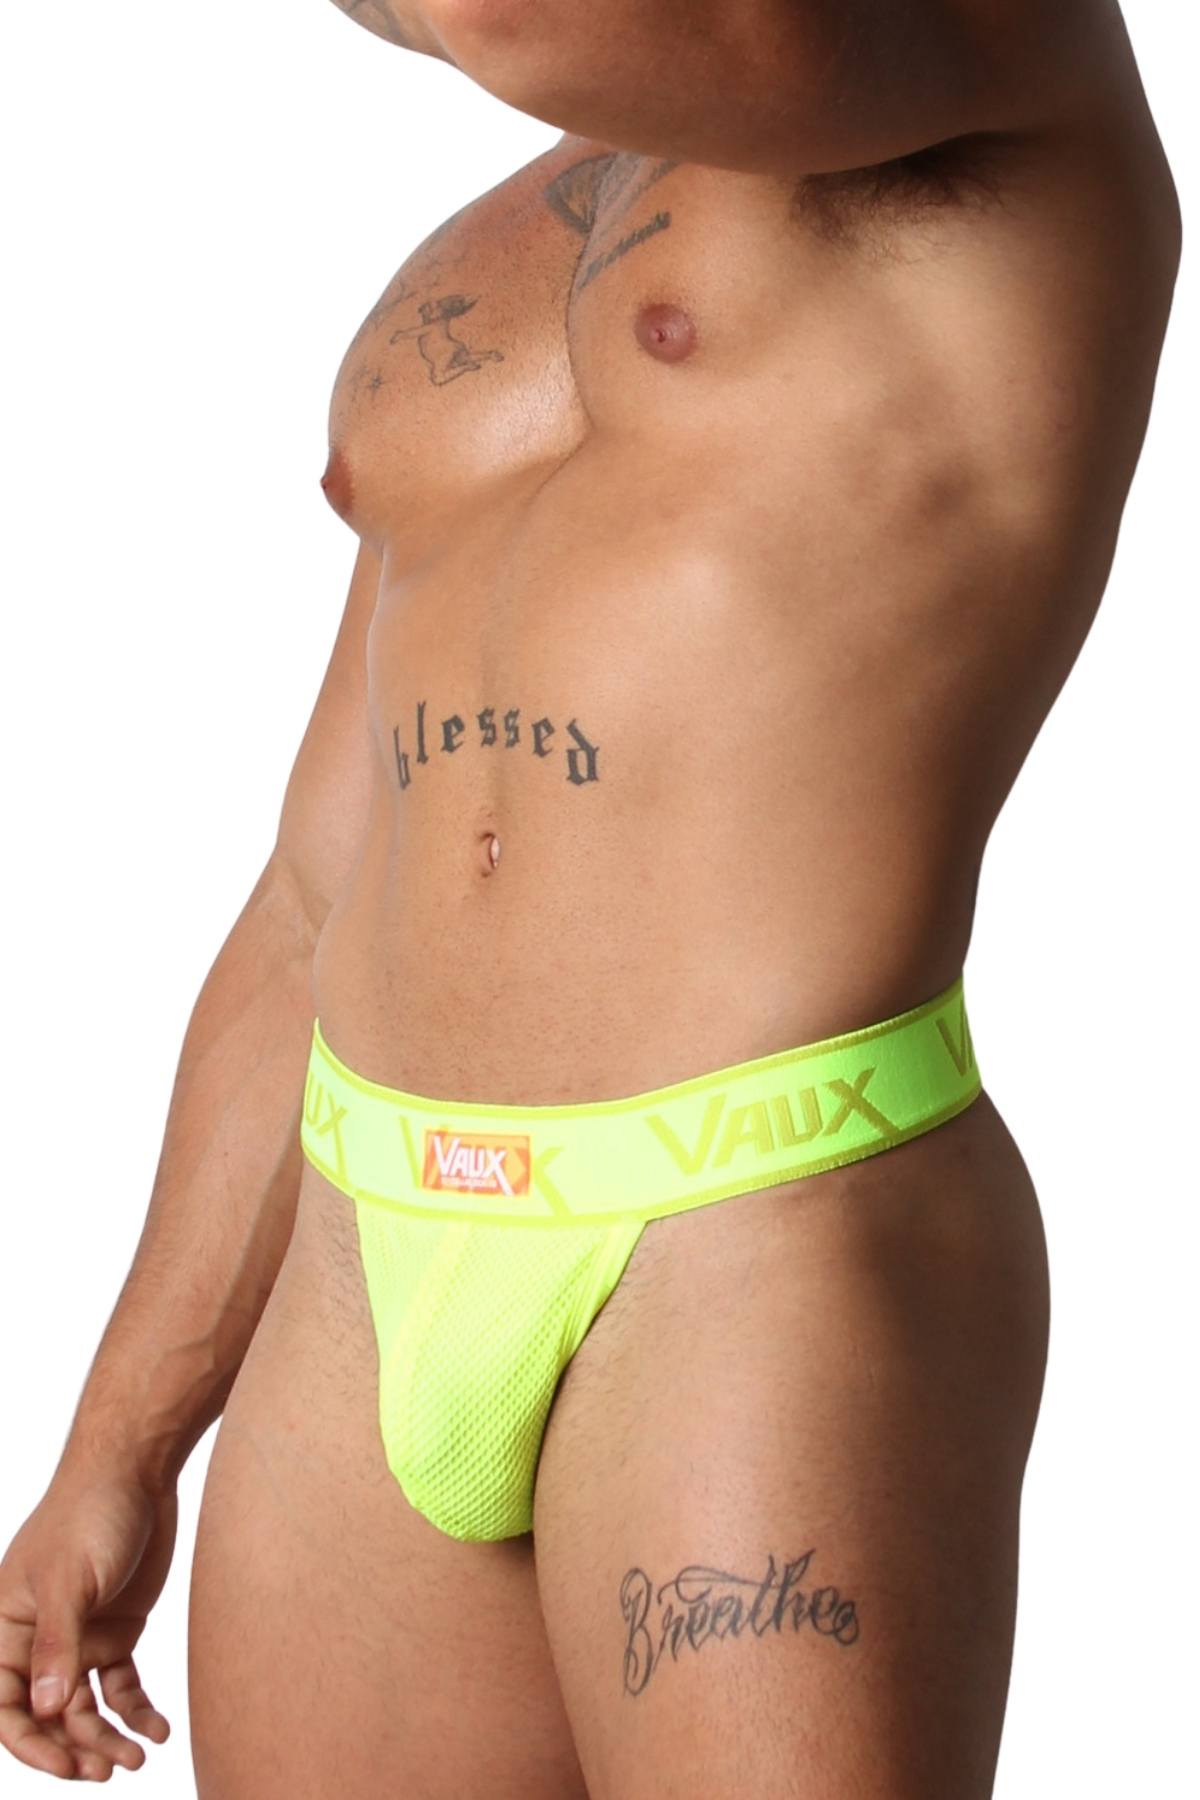 Vaux Yellow VX1 Double "Y" Thong